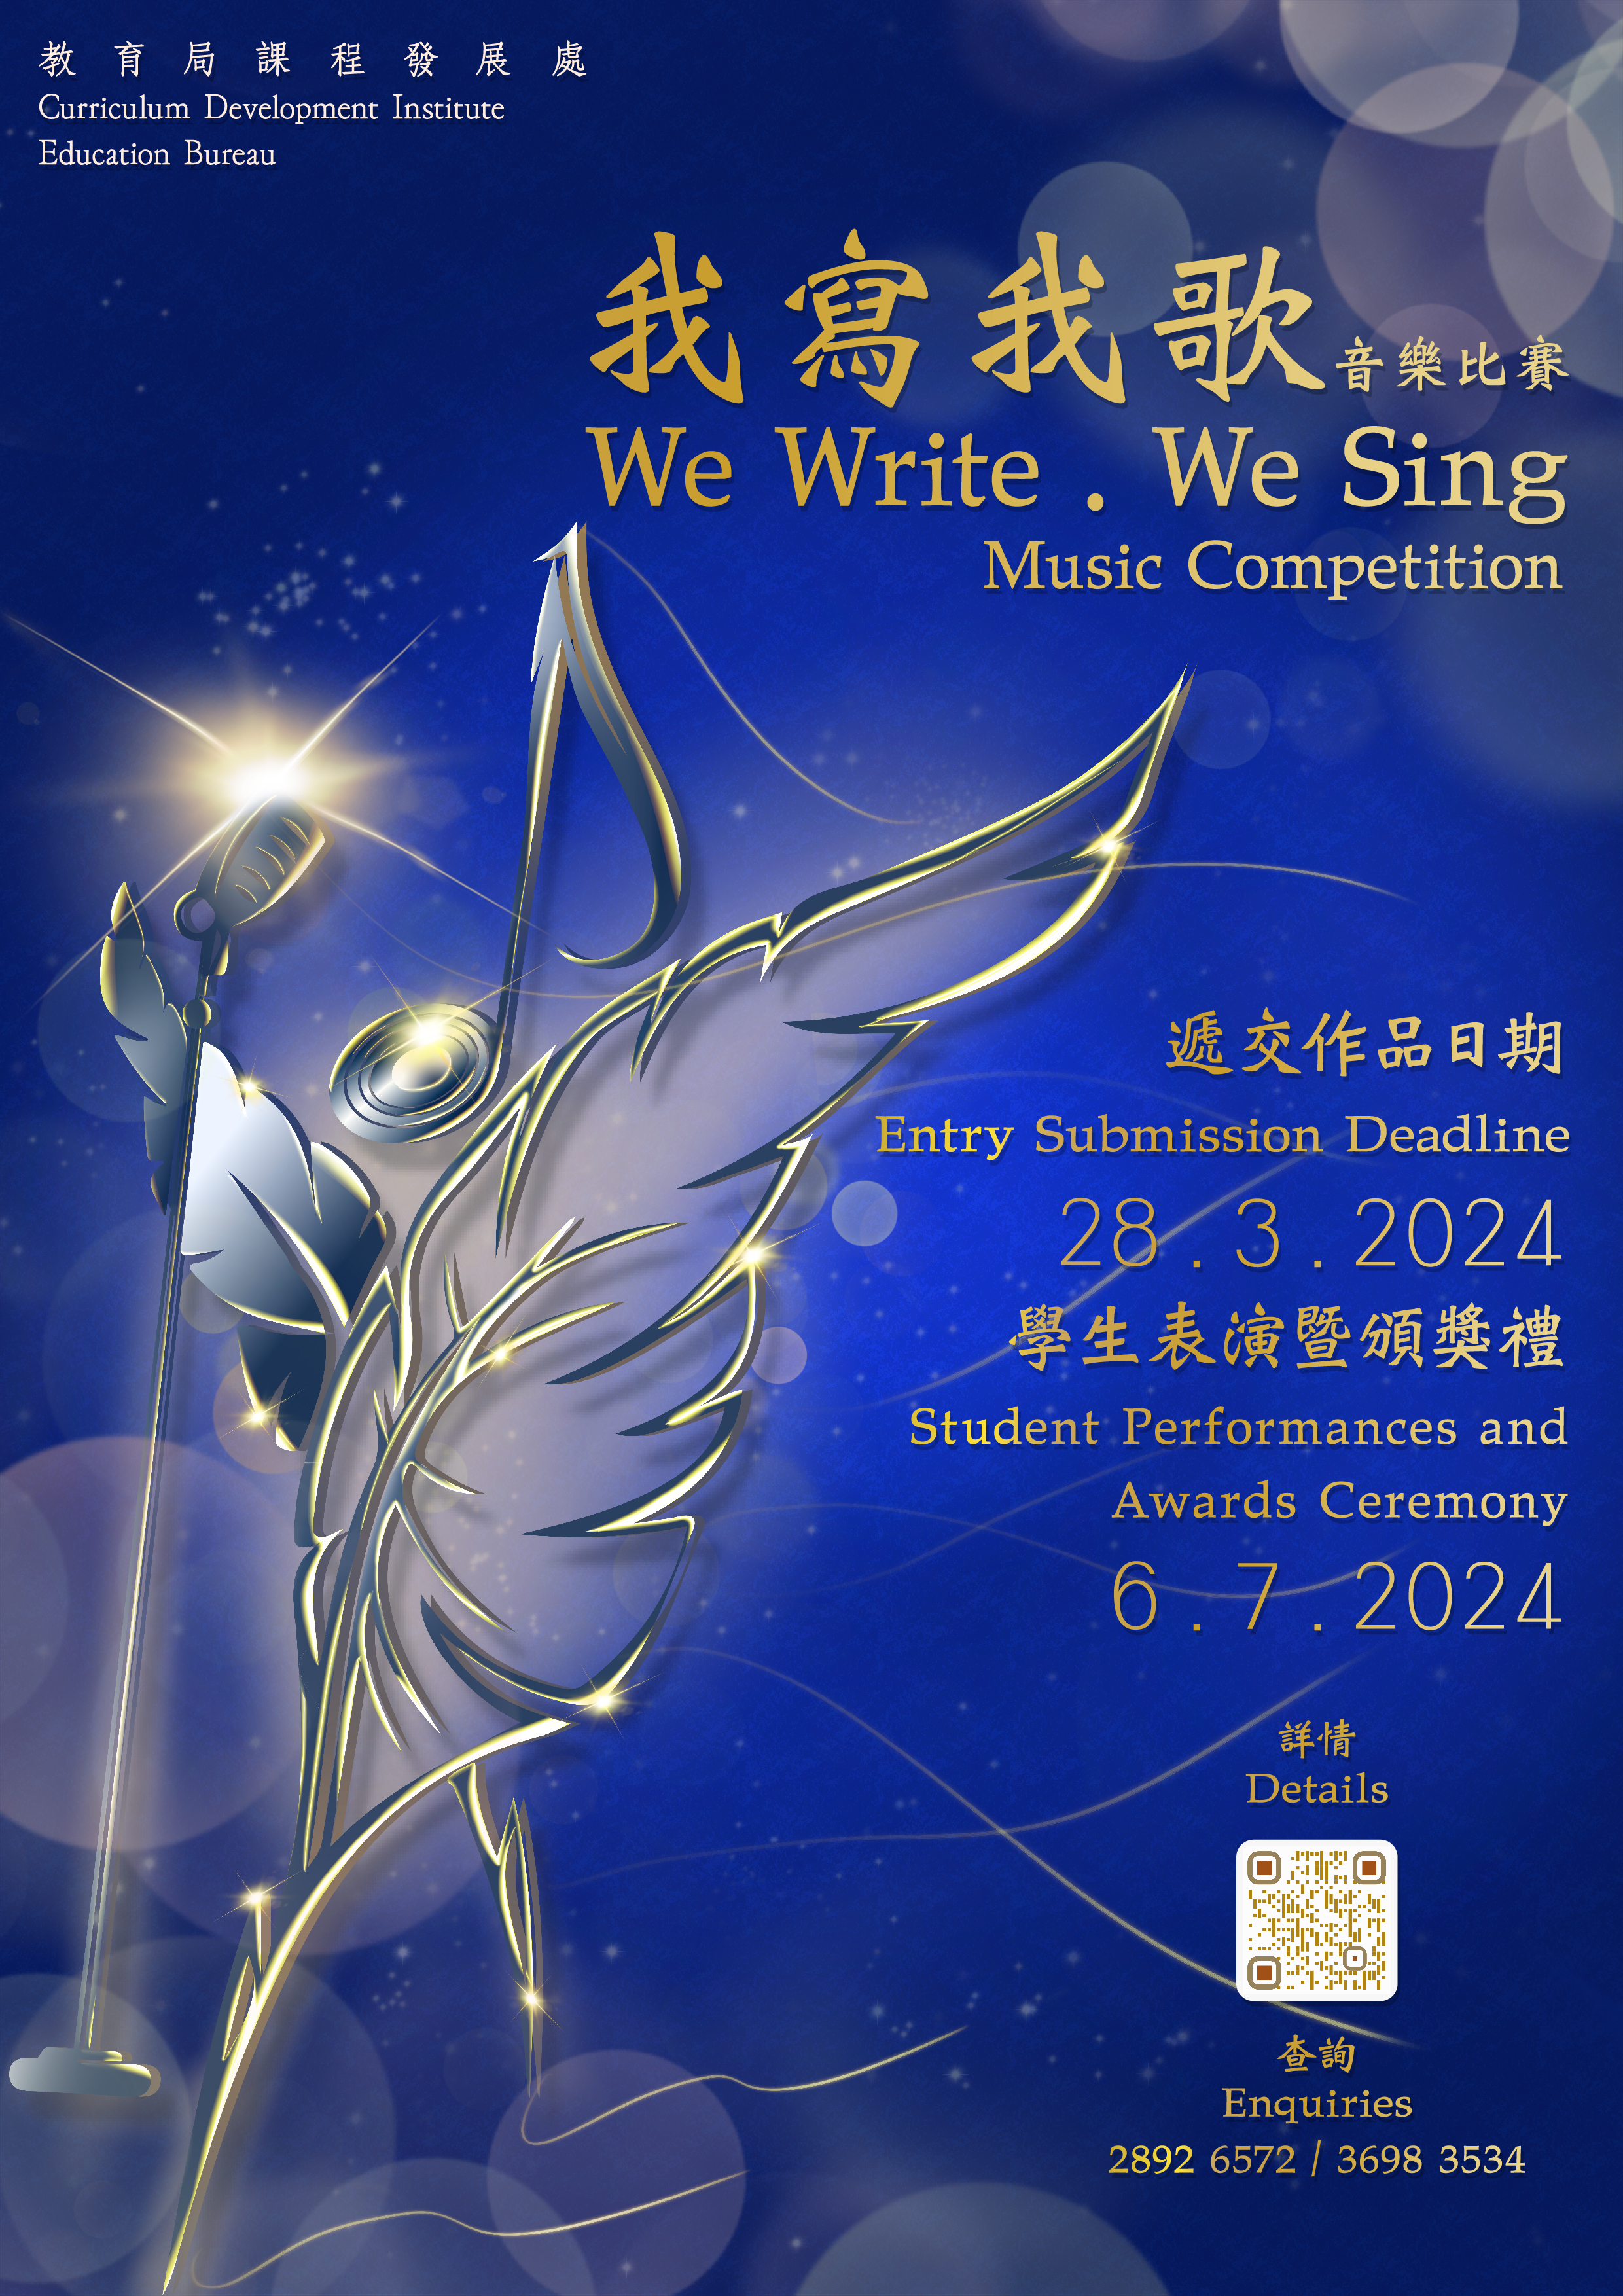 “We Write ‧ We Sing” Music Competition